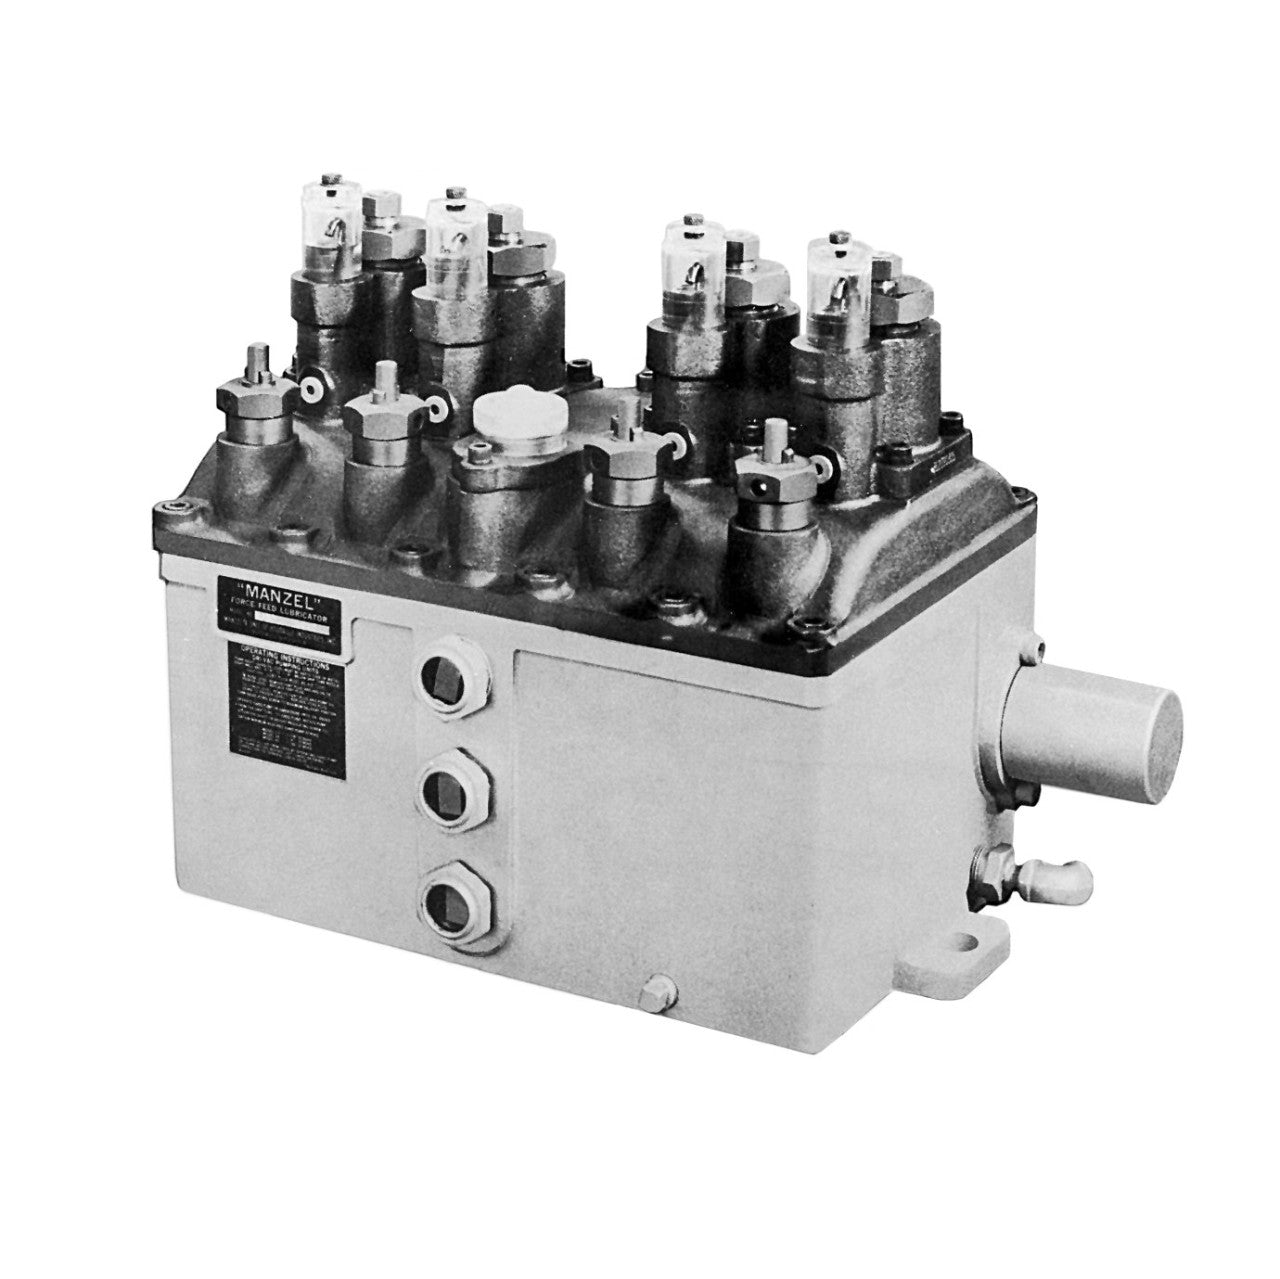 HP-15 6 feed Gear Box without Pumps